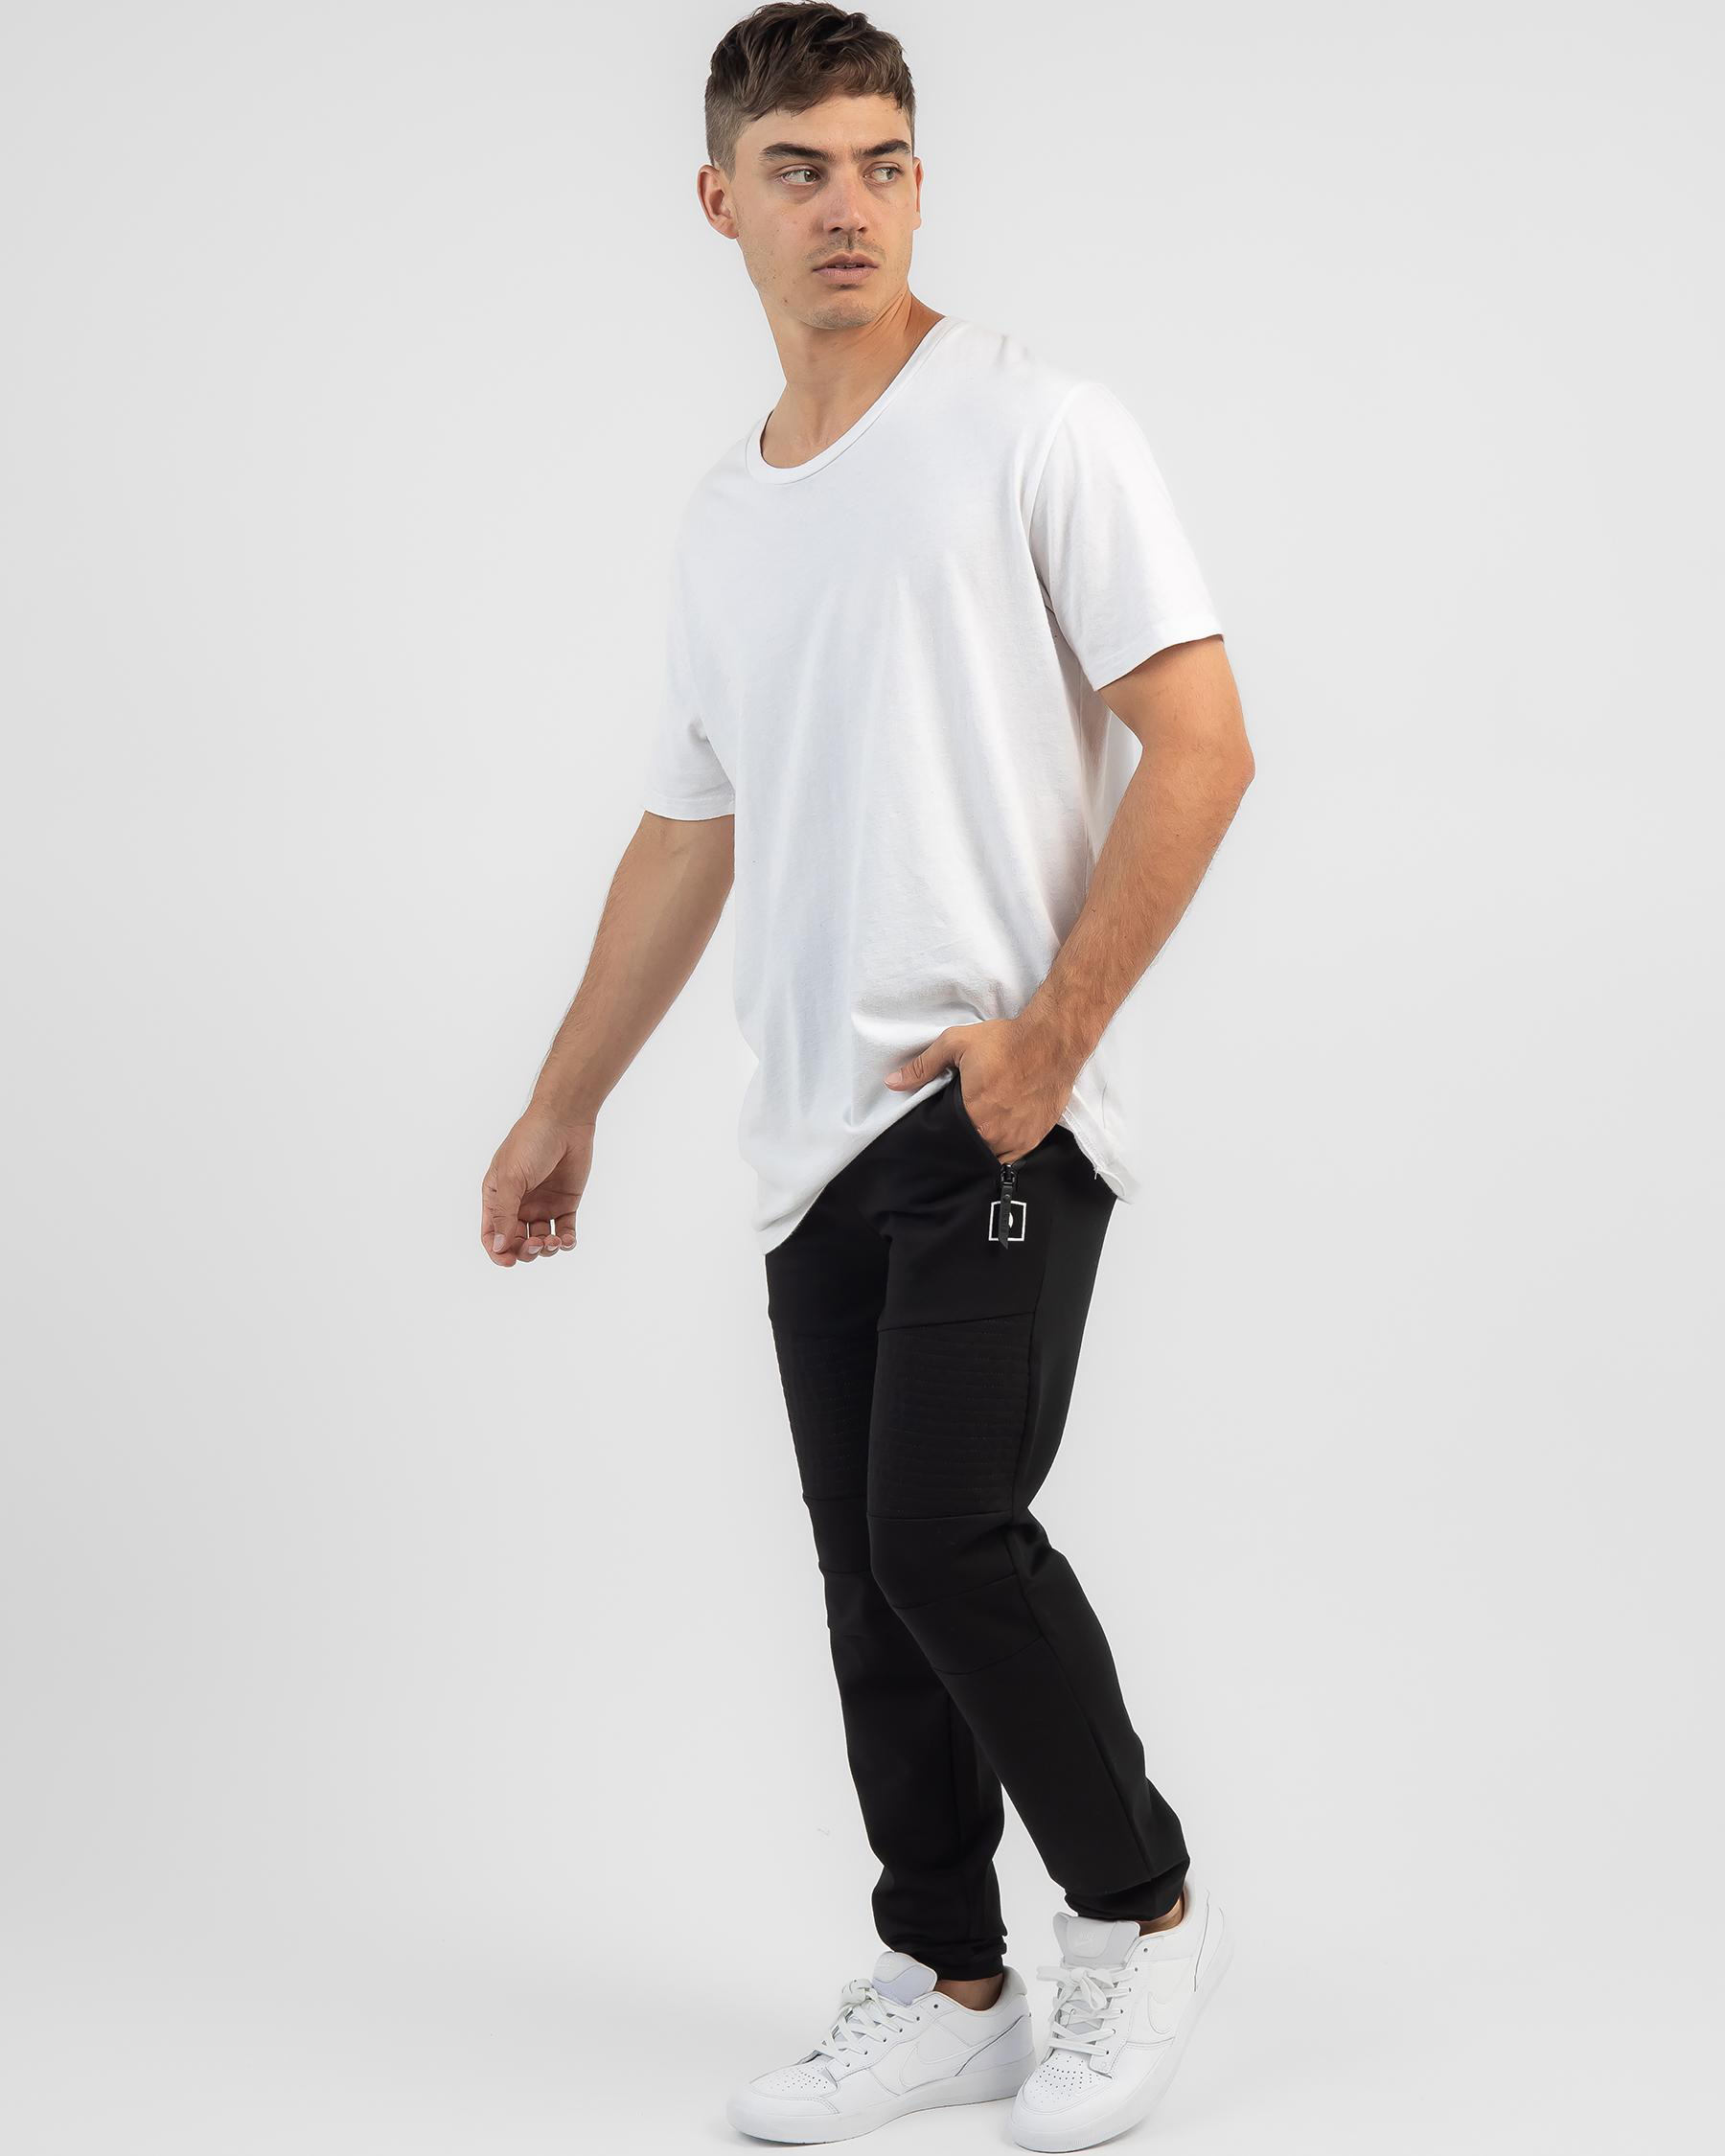 Lucid Compose Track Pants In Black - Fast Shipping & Easy Returns ...